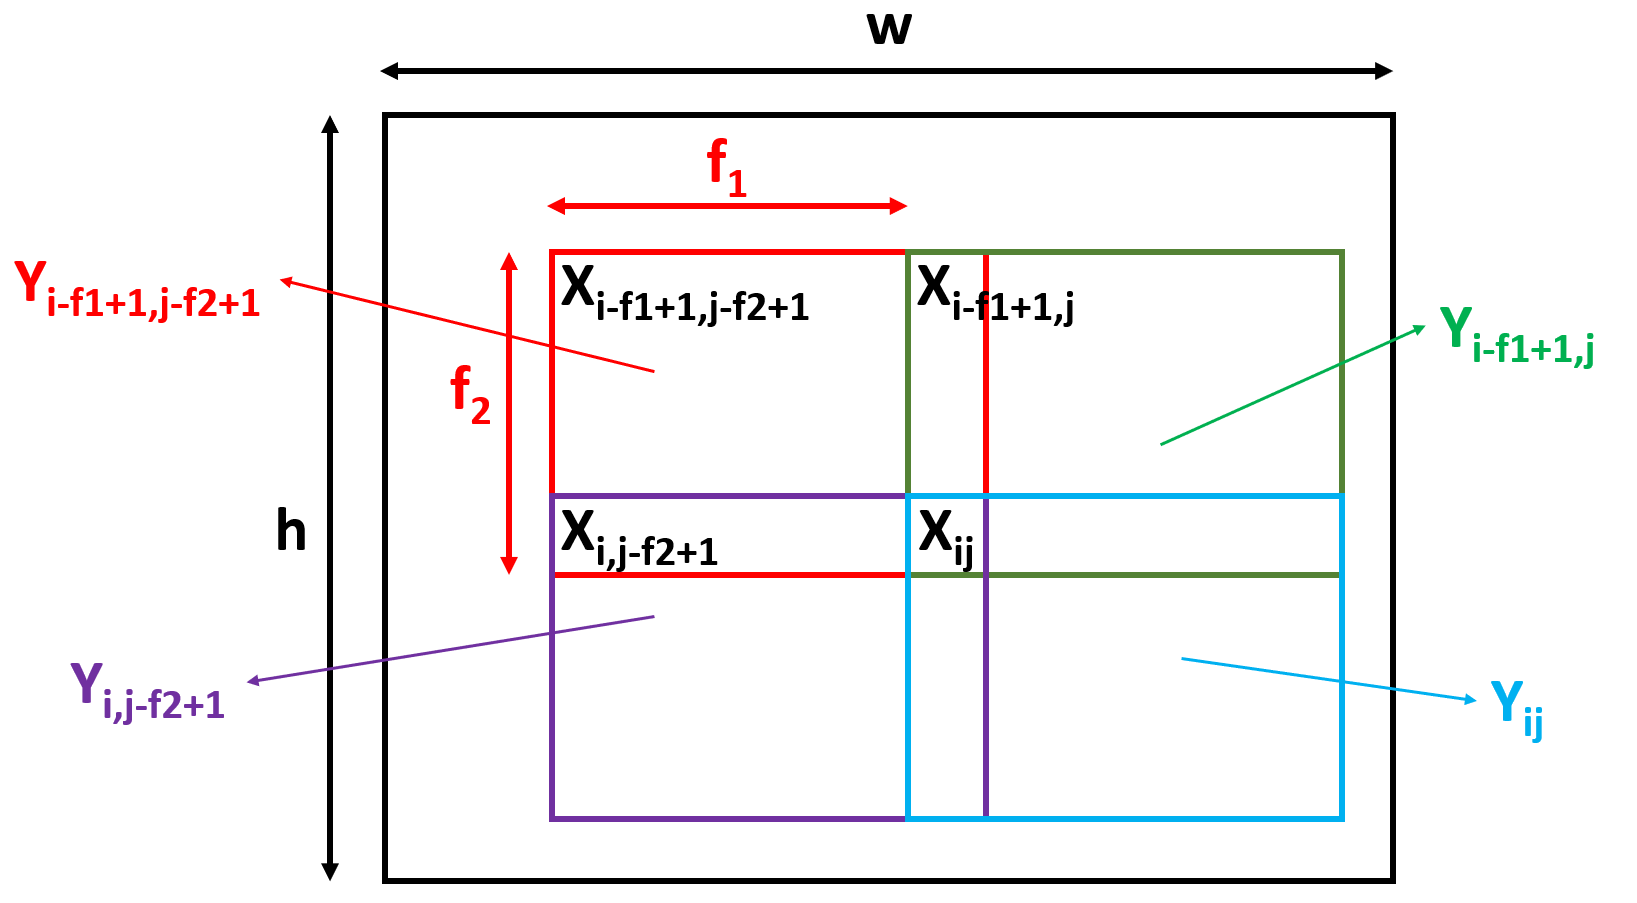 The black box represents $X$, while the red, green, purple and sky blue boxes represent the four extreme filters that will contain $X_{ij}$ as a part of their calculation. In all these four filters, $X_{ij}$ will occupy one corner of the filter.